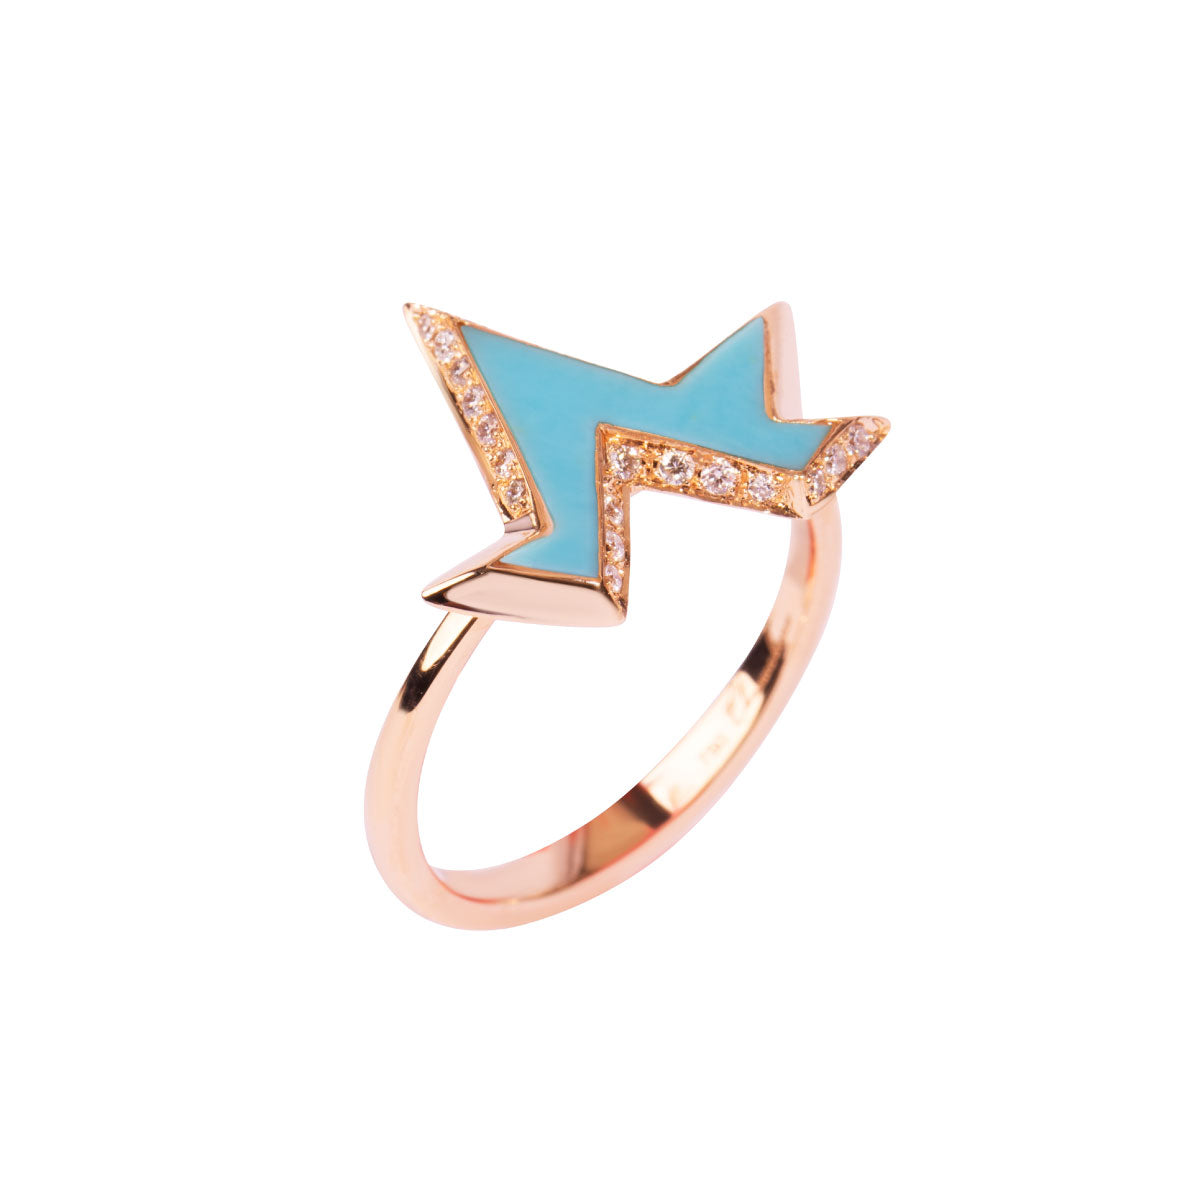 Energy Ring Turquoise Framed In Diamonds Yellow Gold